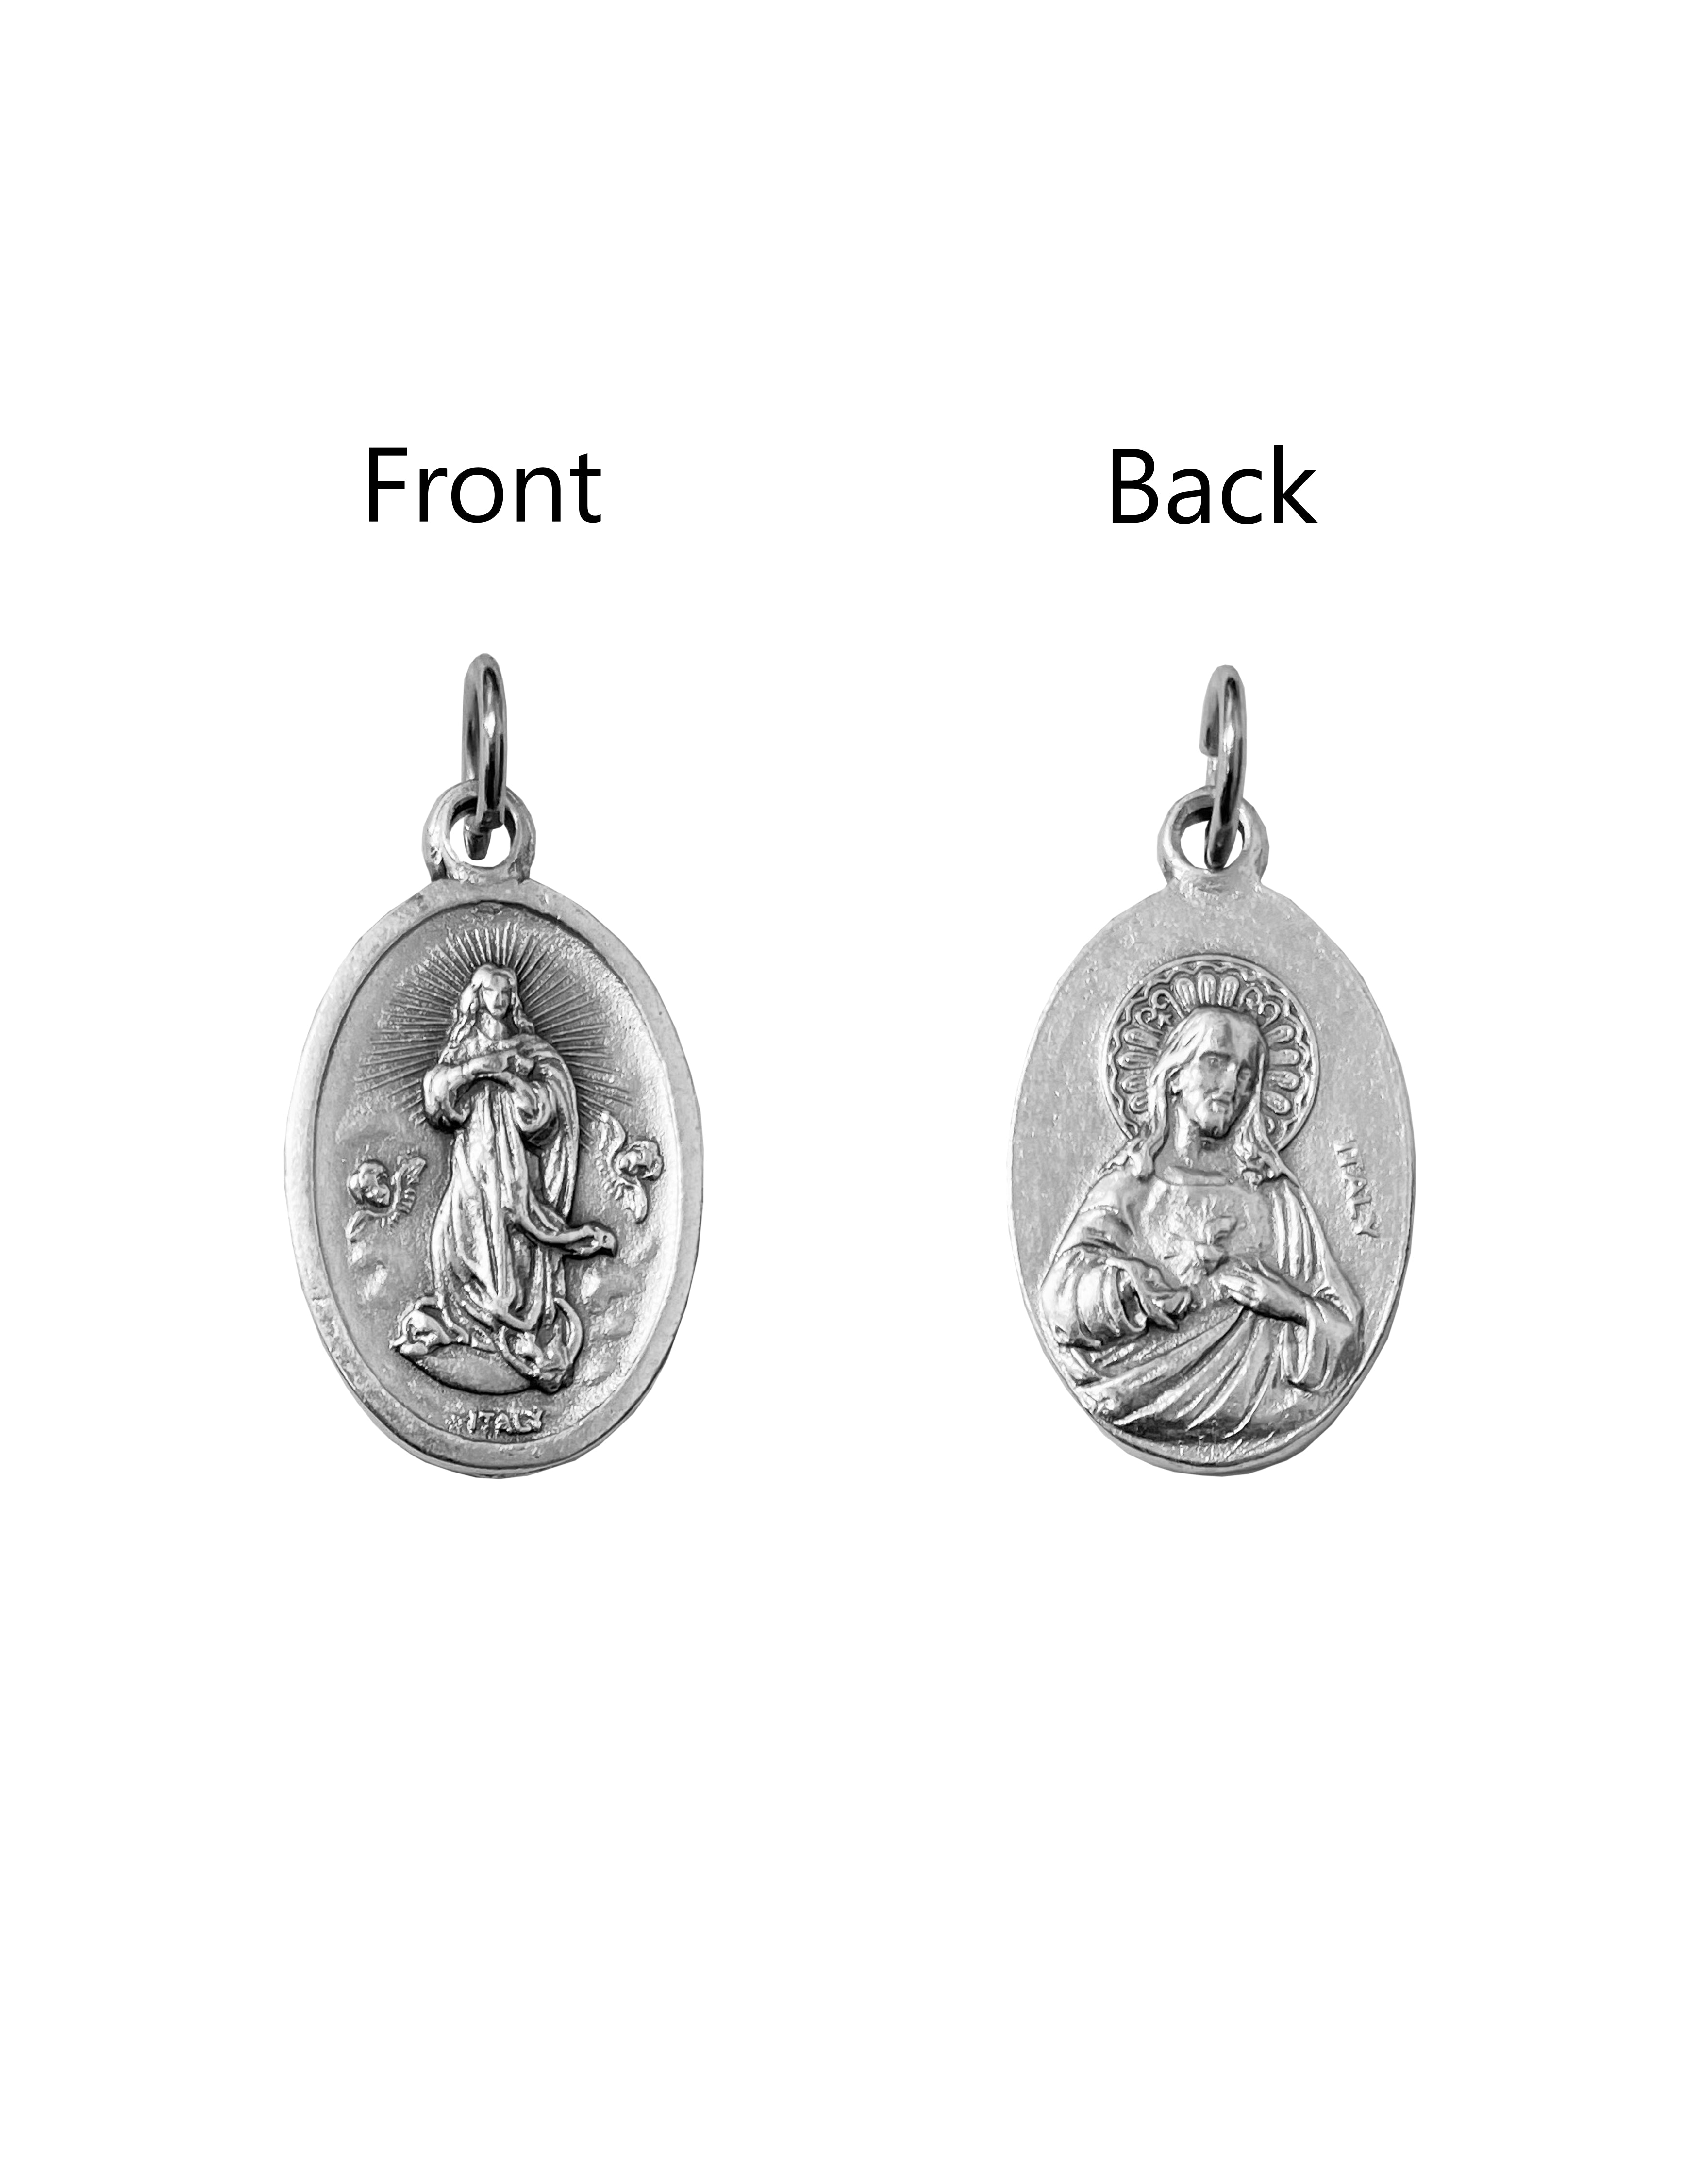 Saints Medals in oxidized silver made in Italy 1.0" x 0.7"